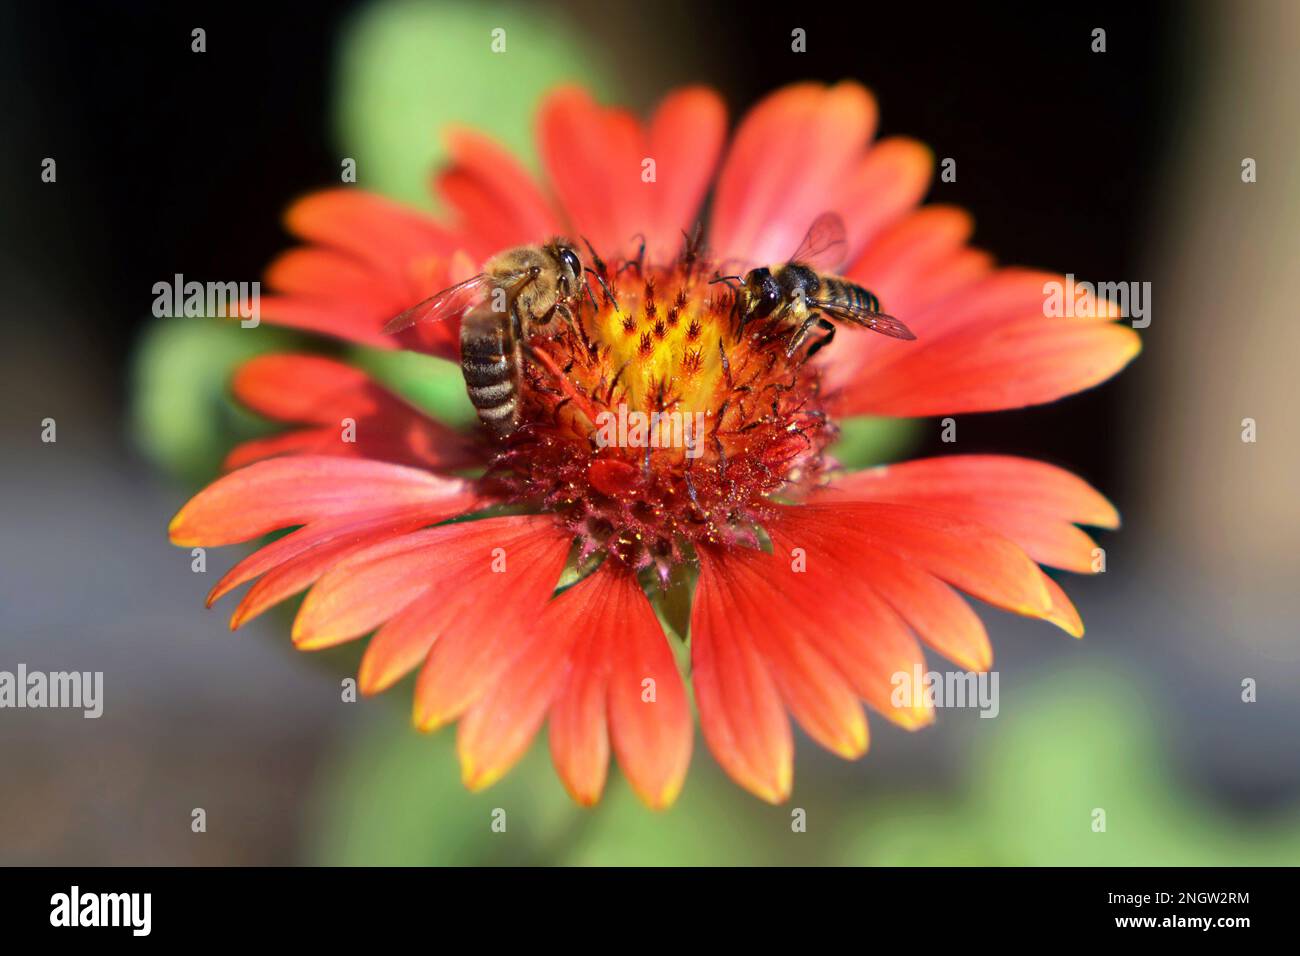 Macro image of the bees on the flower in the summer garden. Nature concept. Stock Photo